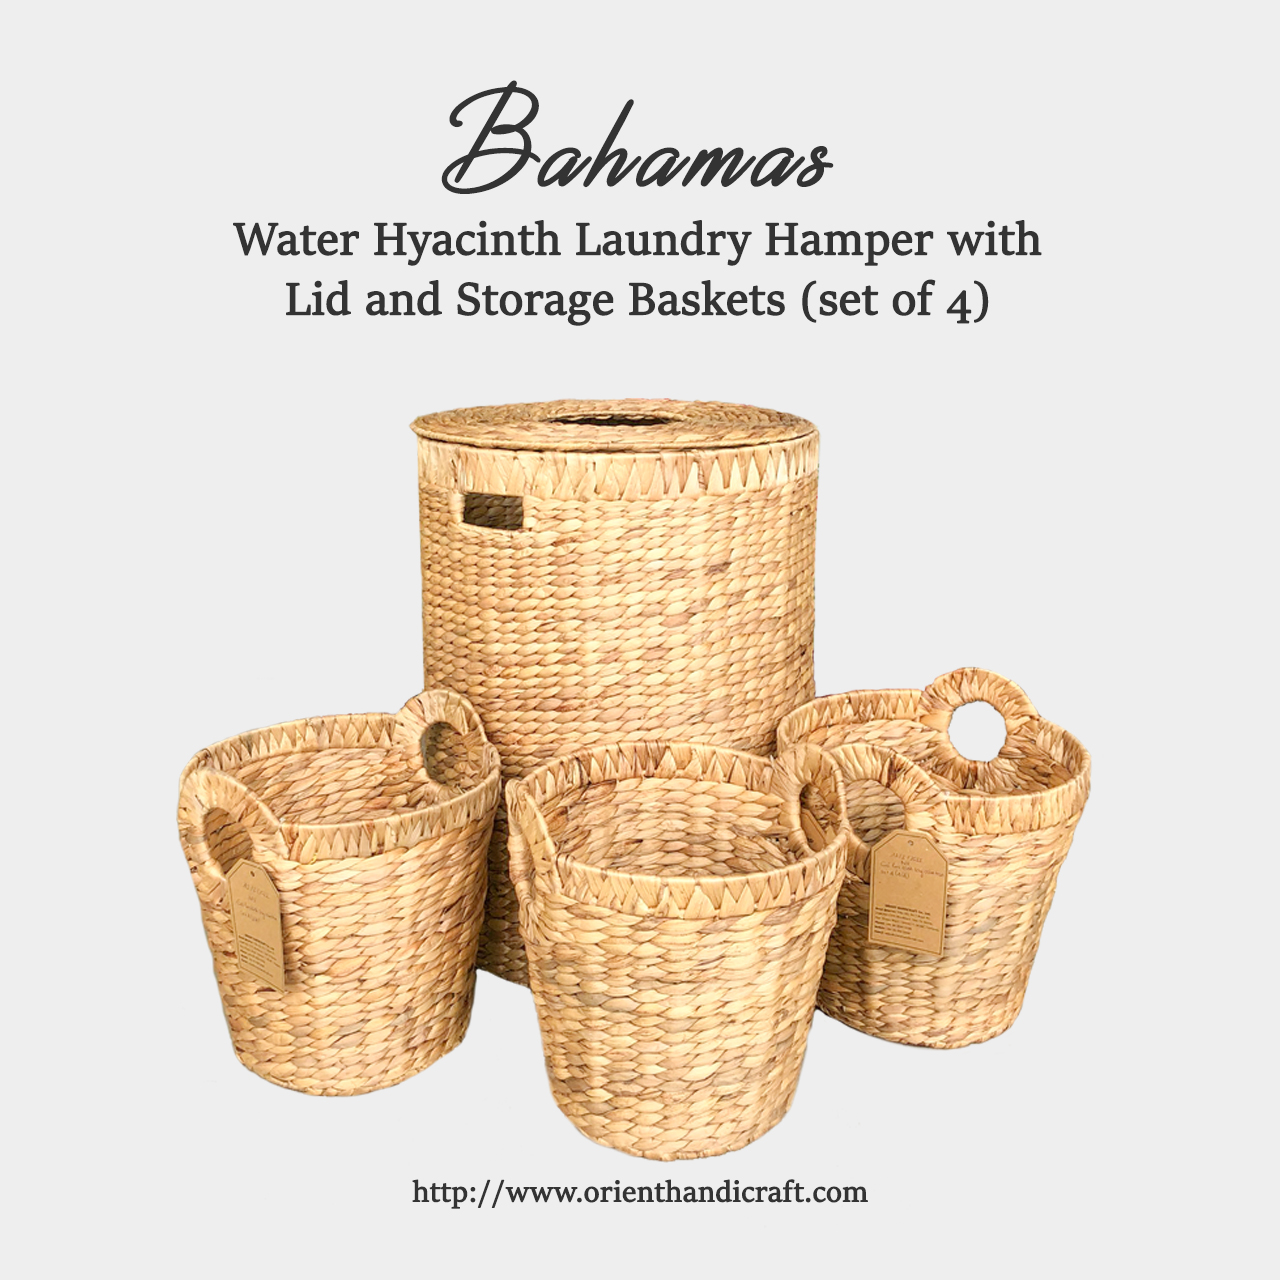 Water Hyacinth Laundry Hamper with Lid and Storage Baskets